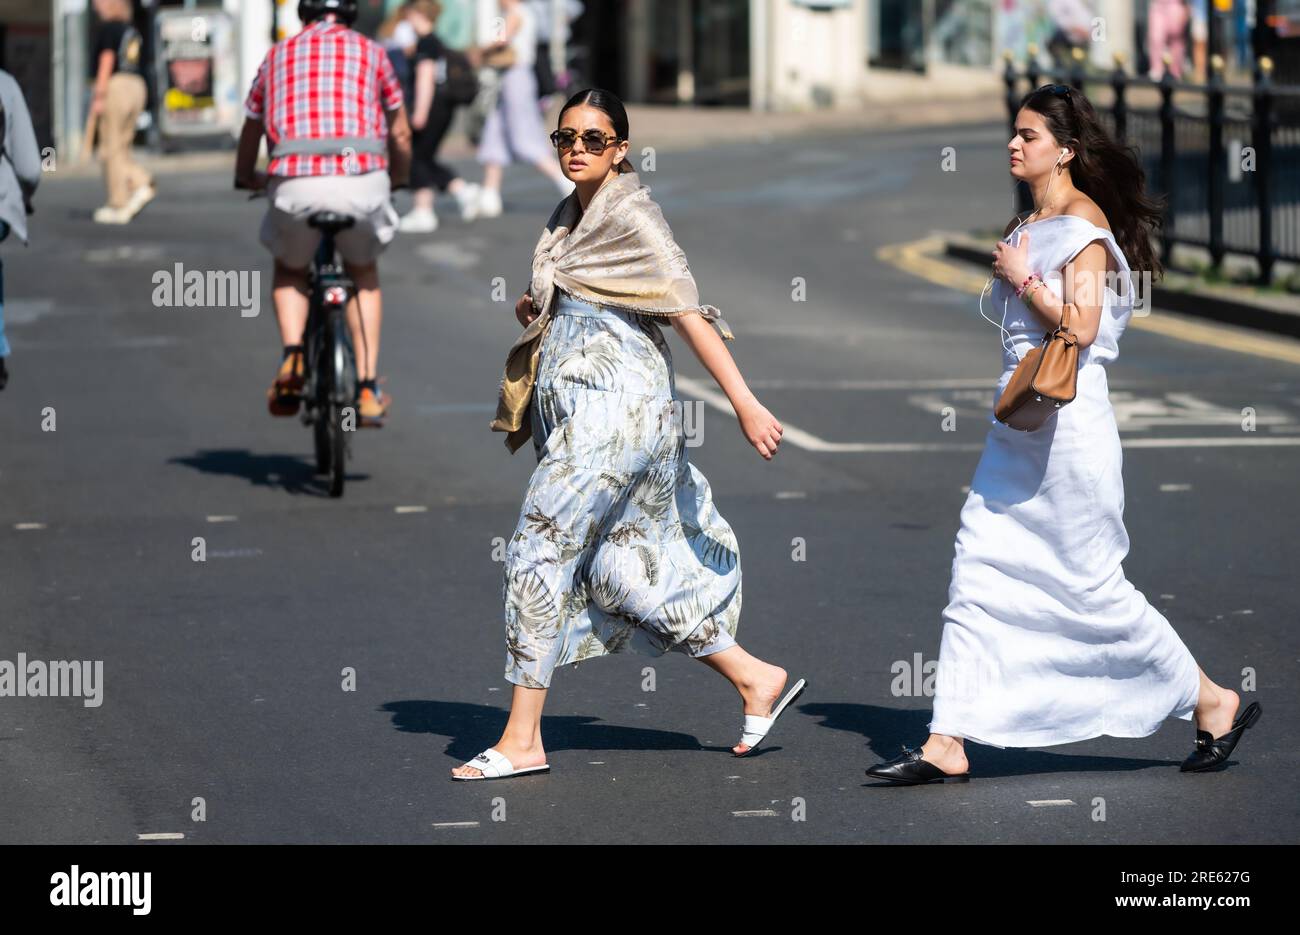 Pair of young women possible Asian crossing a busy road in Summer, looking well dressed, smart, confident and classy. In Brighton & Hove, England, UK. Stock Photo